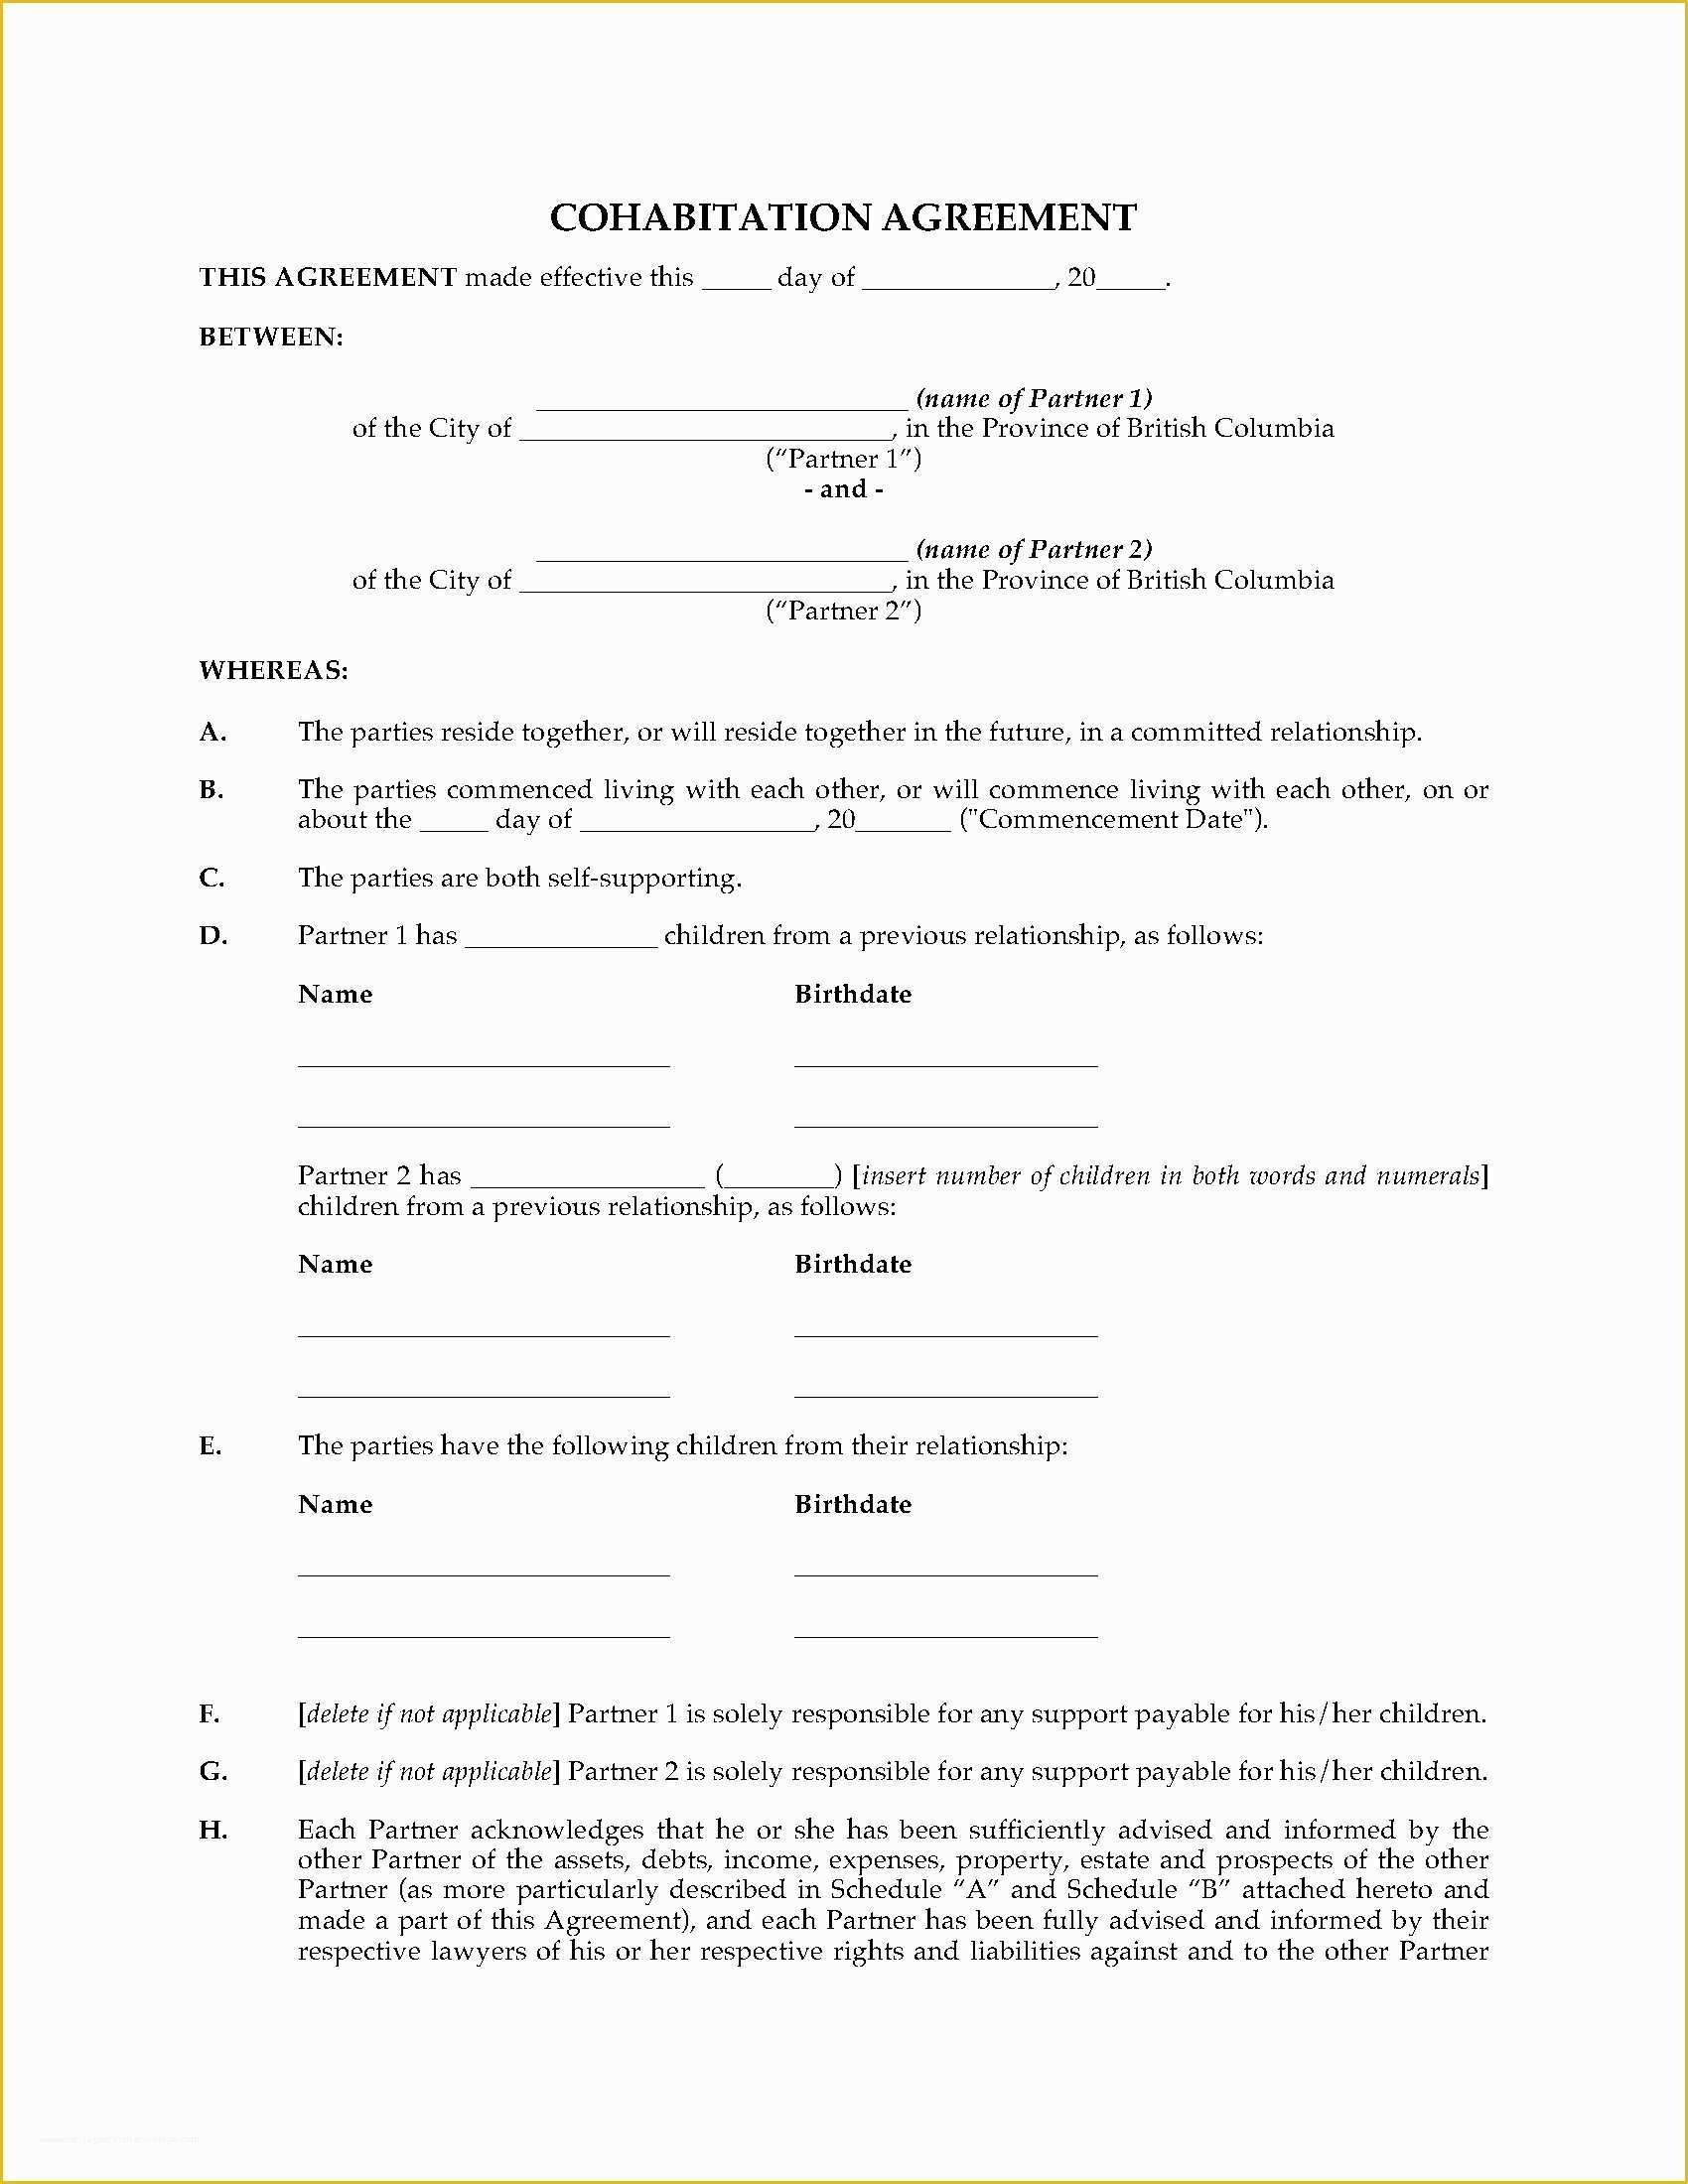 Living together Agreement Template Free Of Agreement Cohabitation Agreement